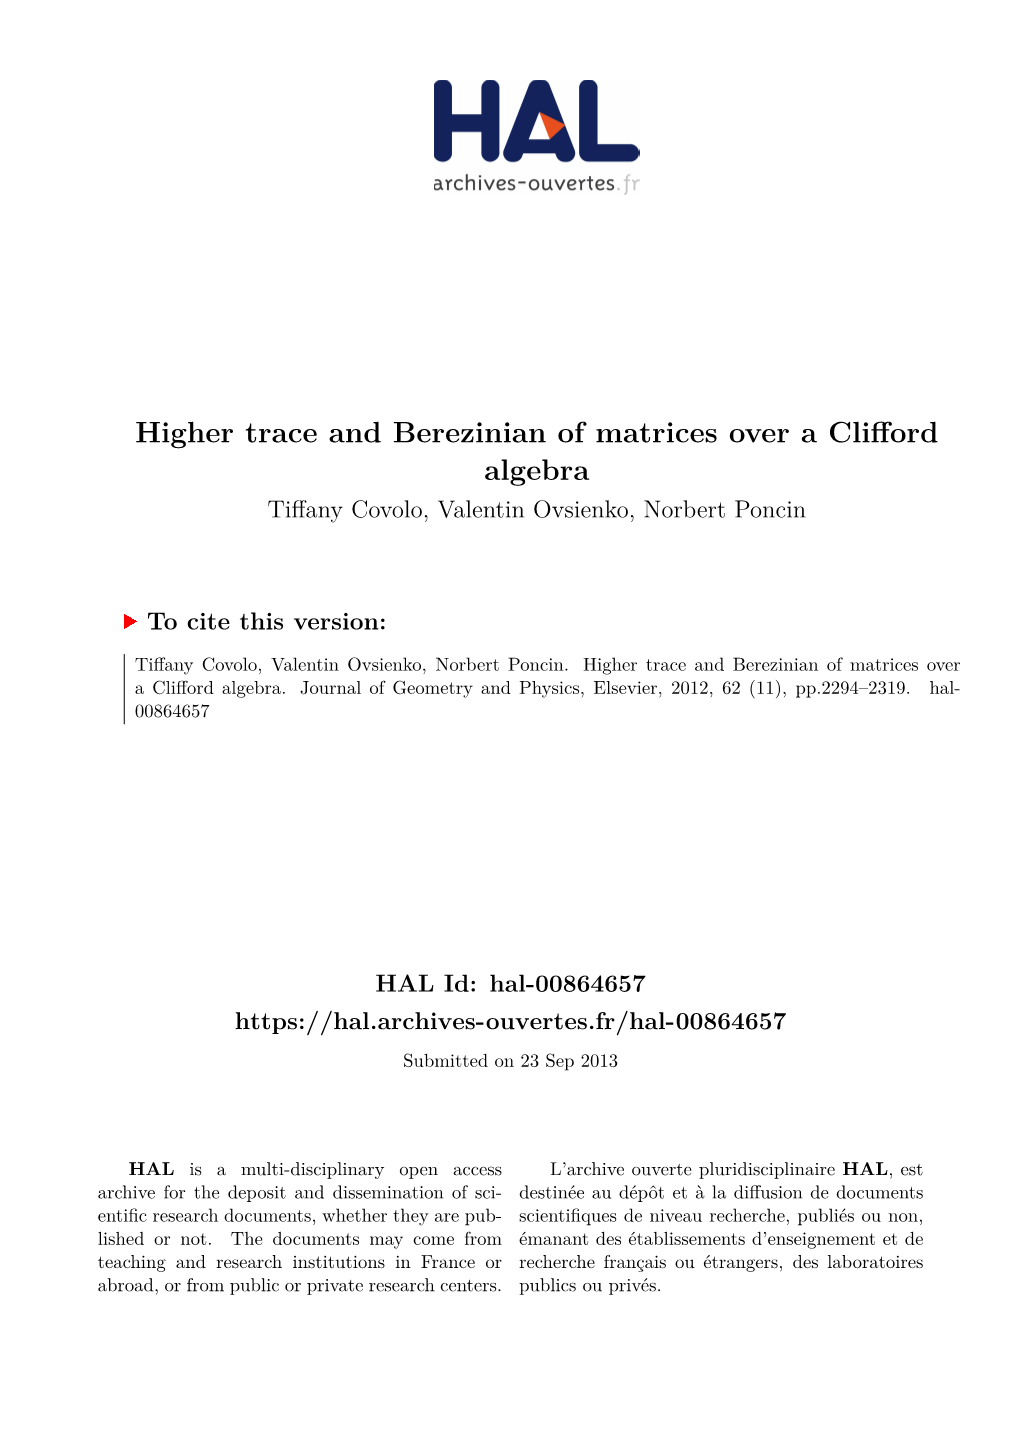 Higher Trace and Berezinian of Matrices Over a Clifford Algebra Tiffany Covolo, Valentin Ovsienko, Norbert Poncin